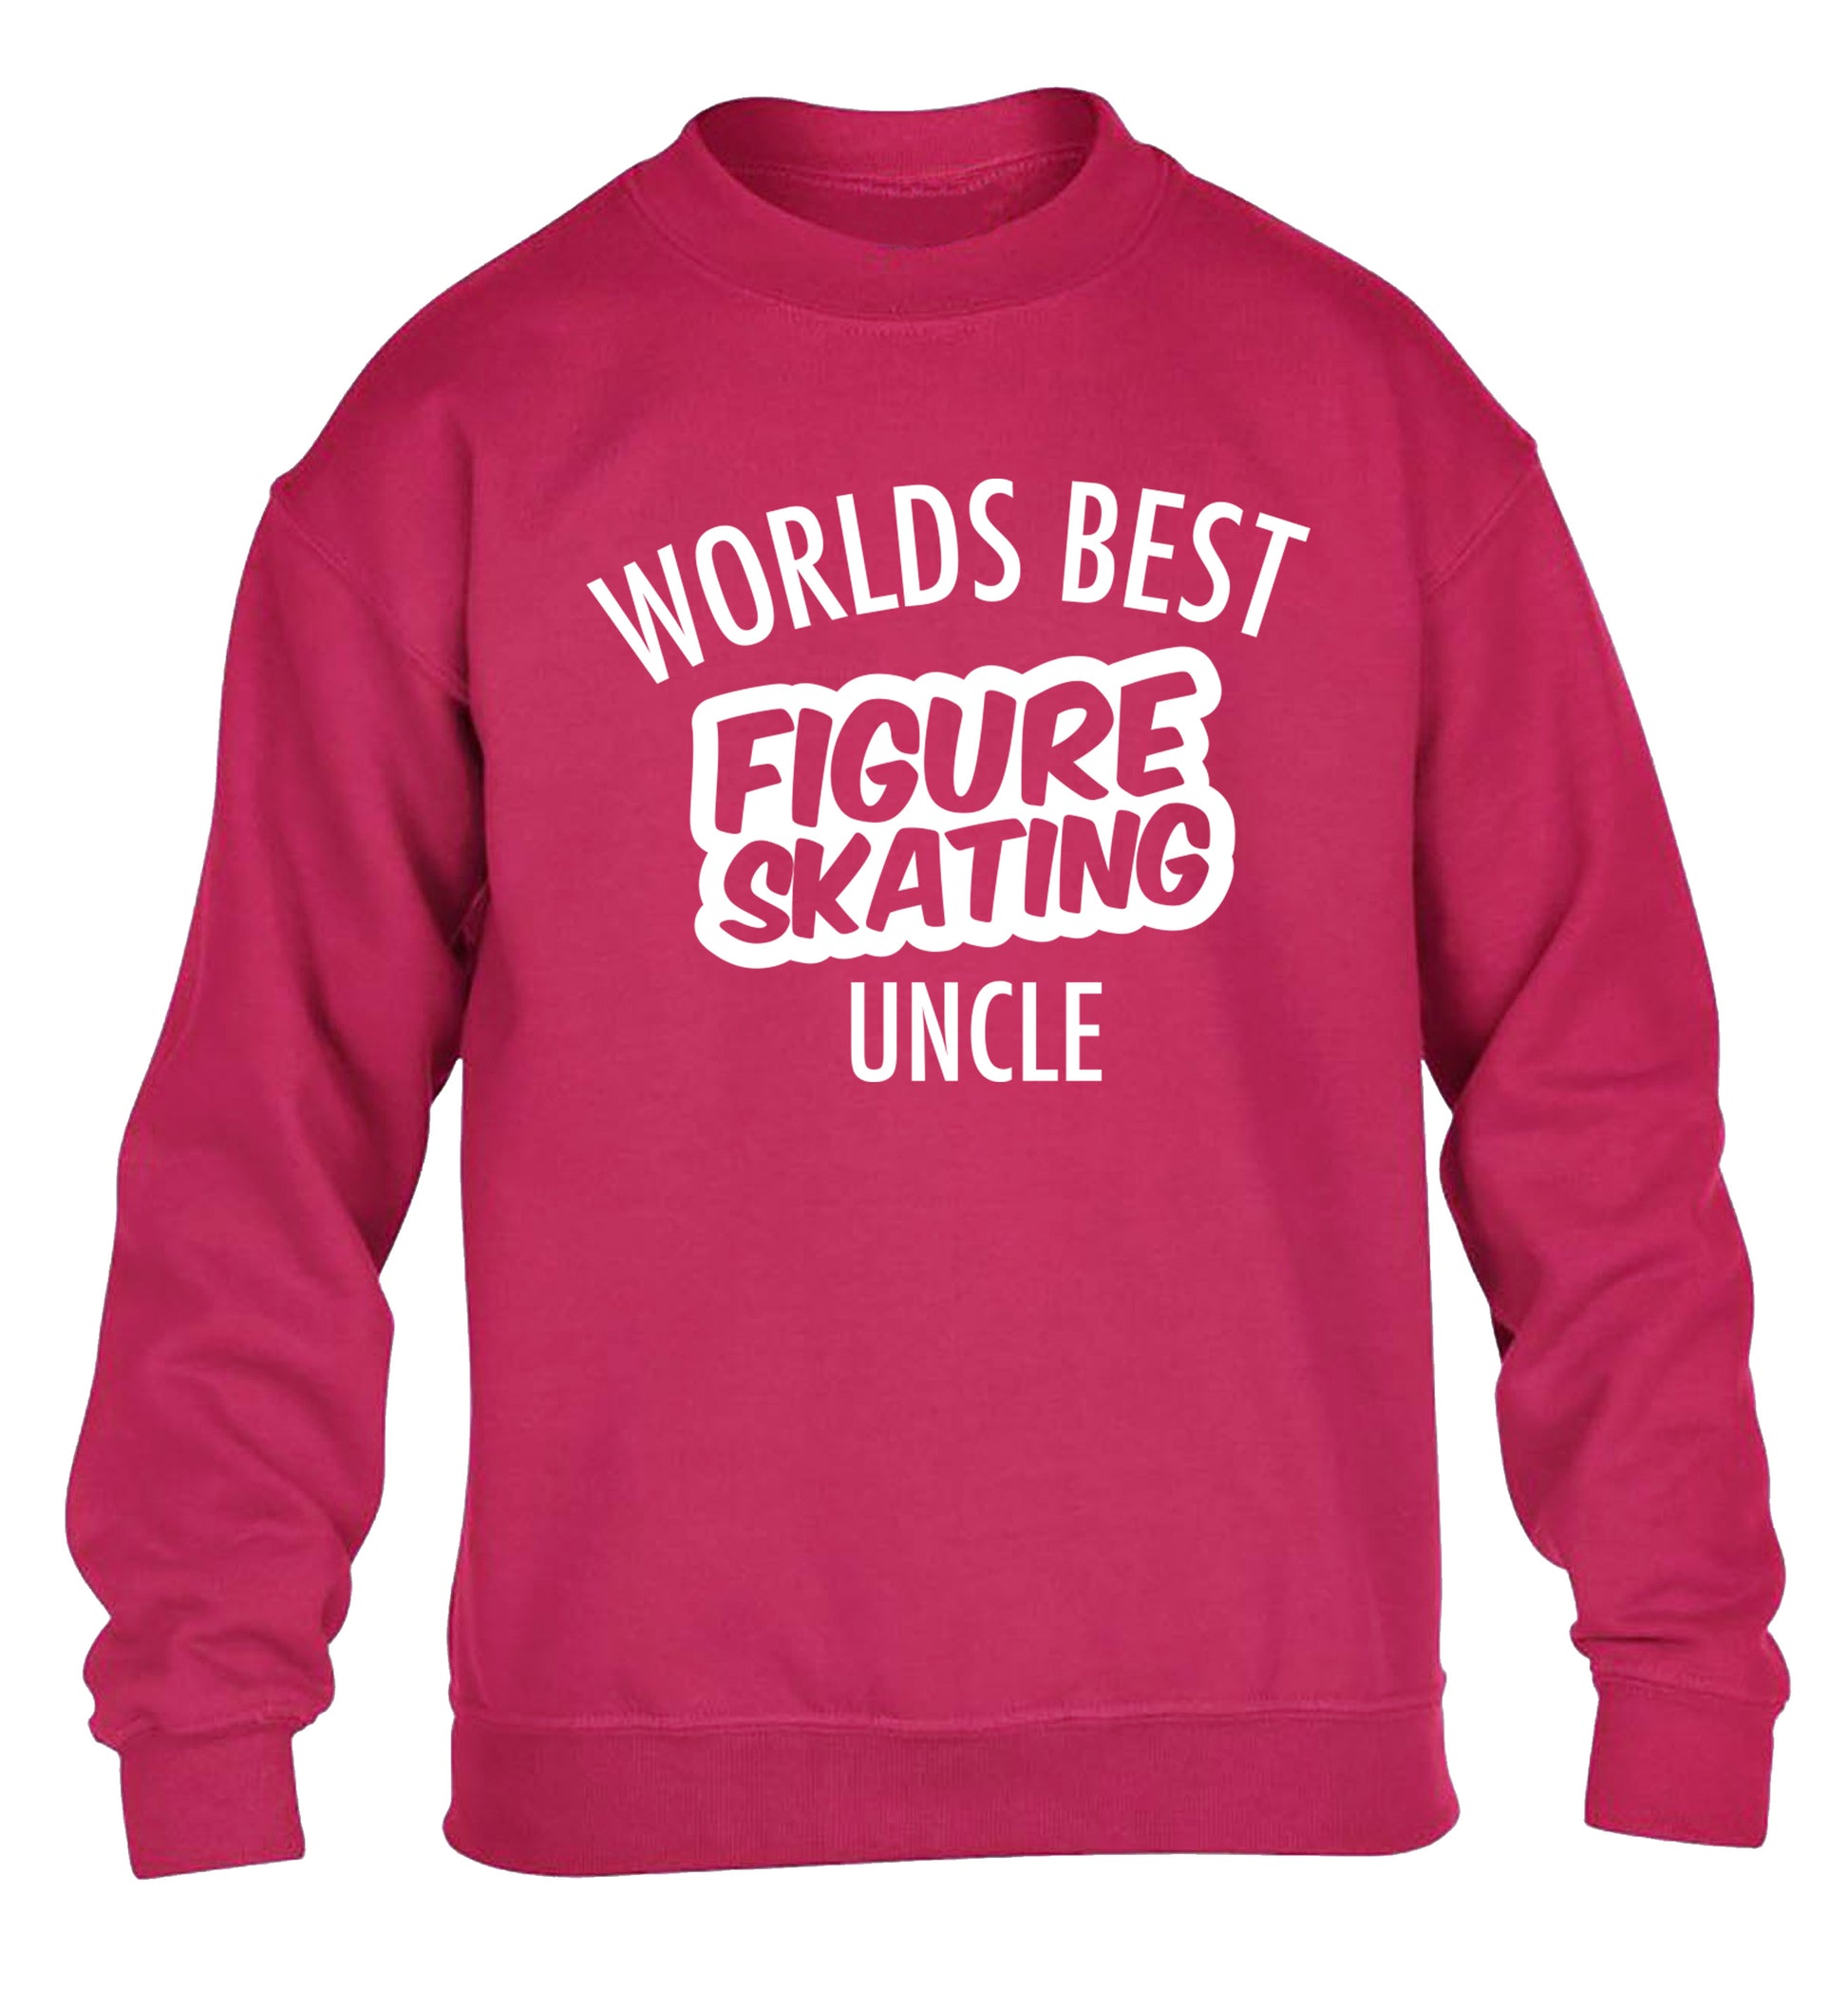 Worlds best figure skating uncle children's pink sweater 12-14 Years